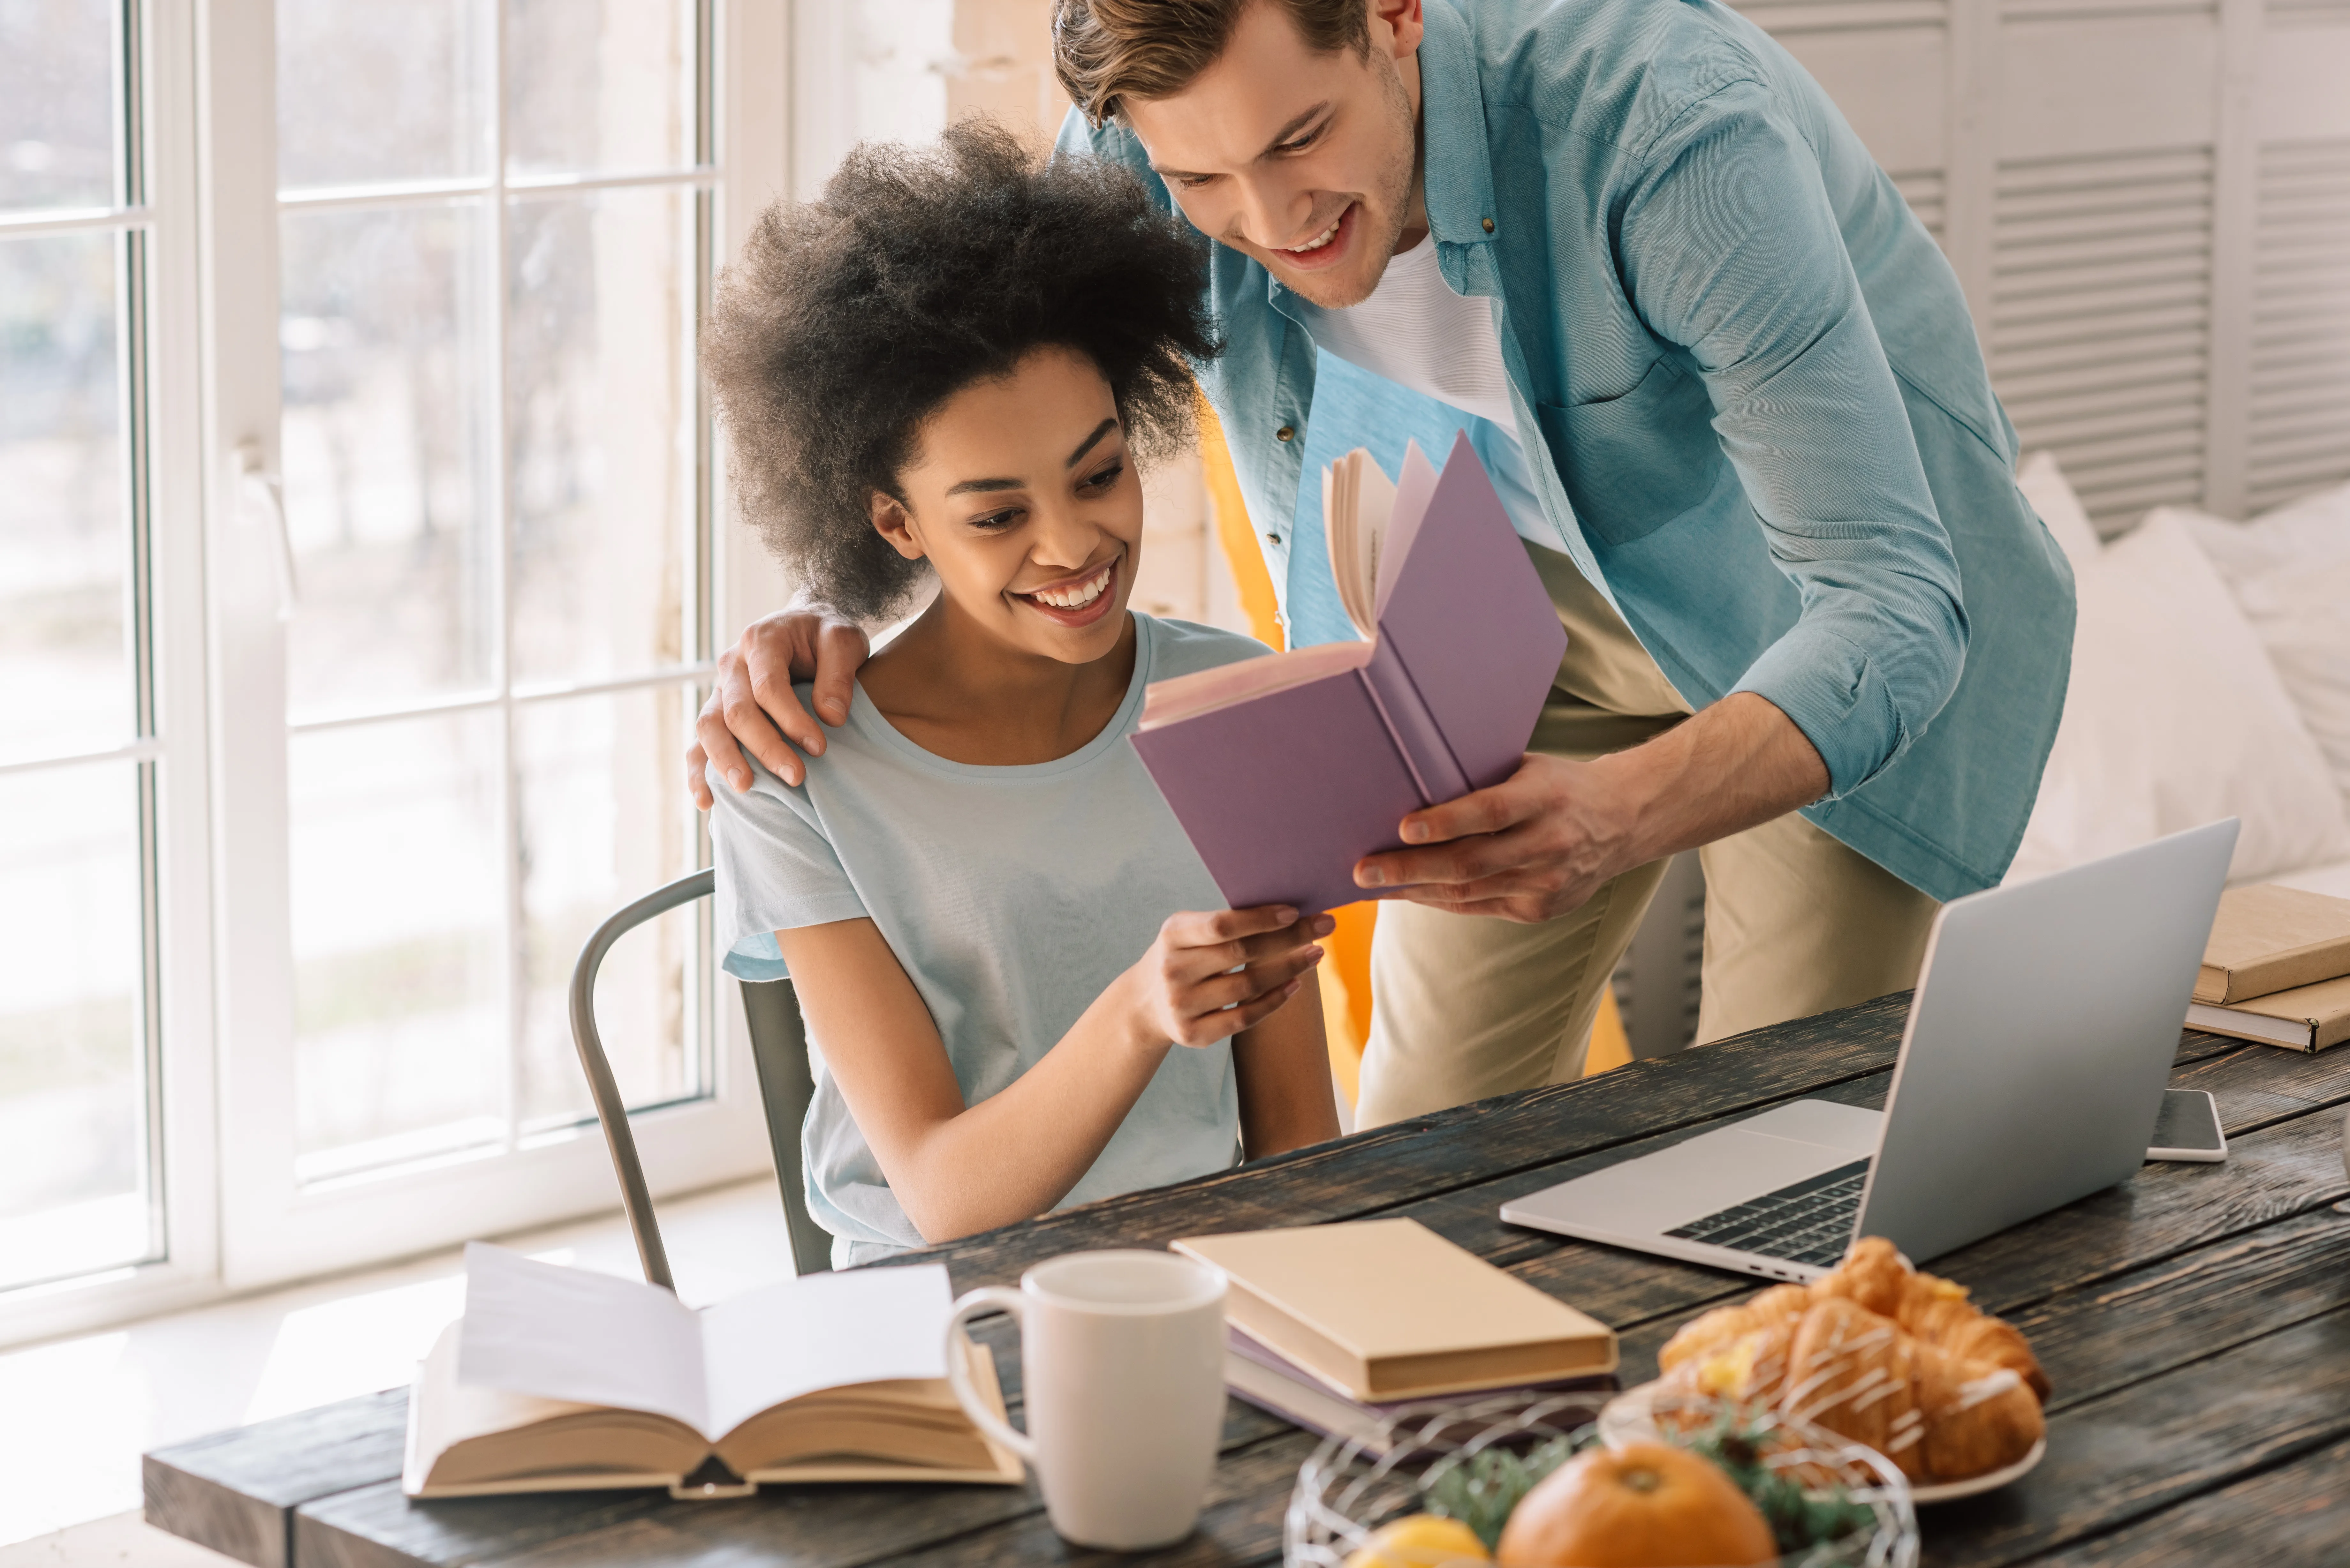 If you're wondering how to build a friendship with your husband, these are some great places to begin! After this, you'll be closer than ever before.